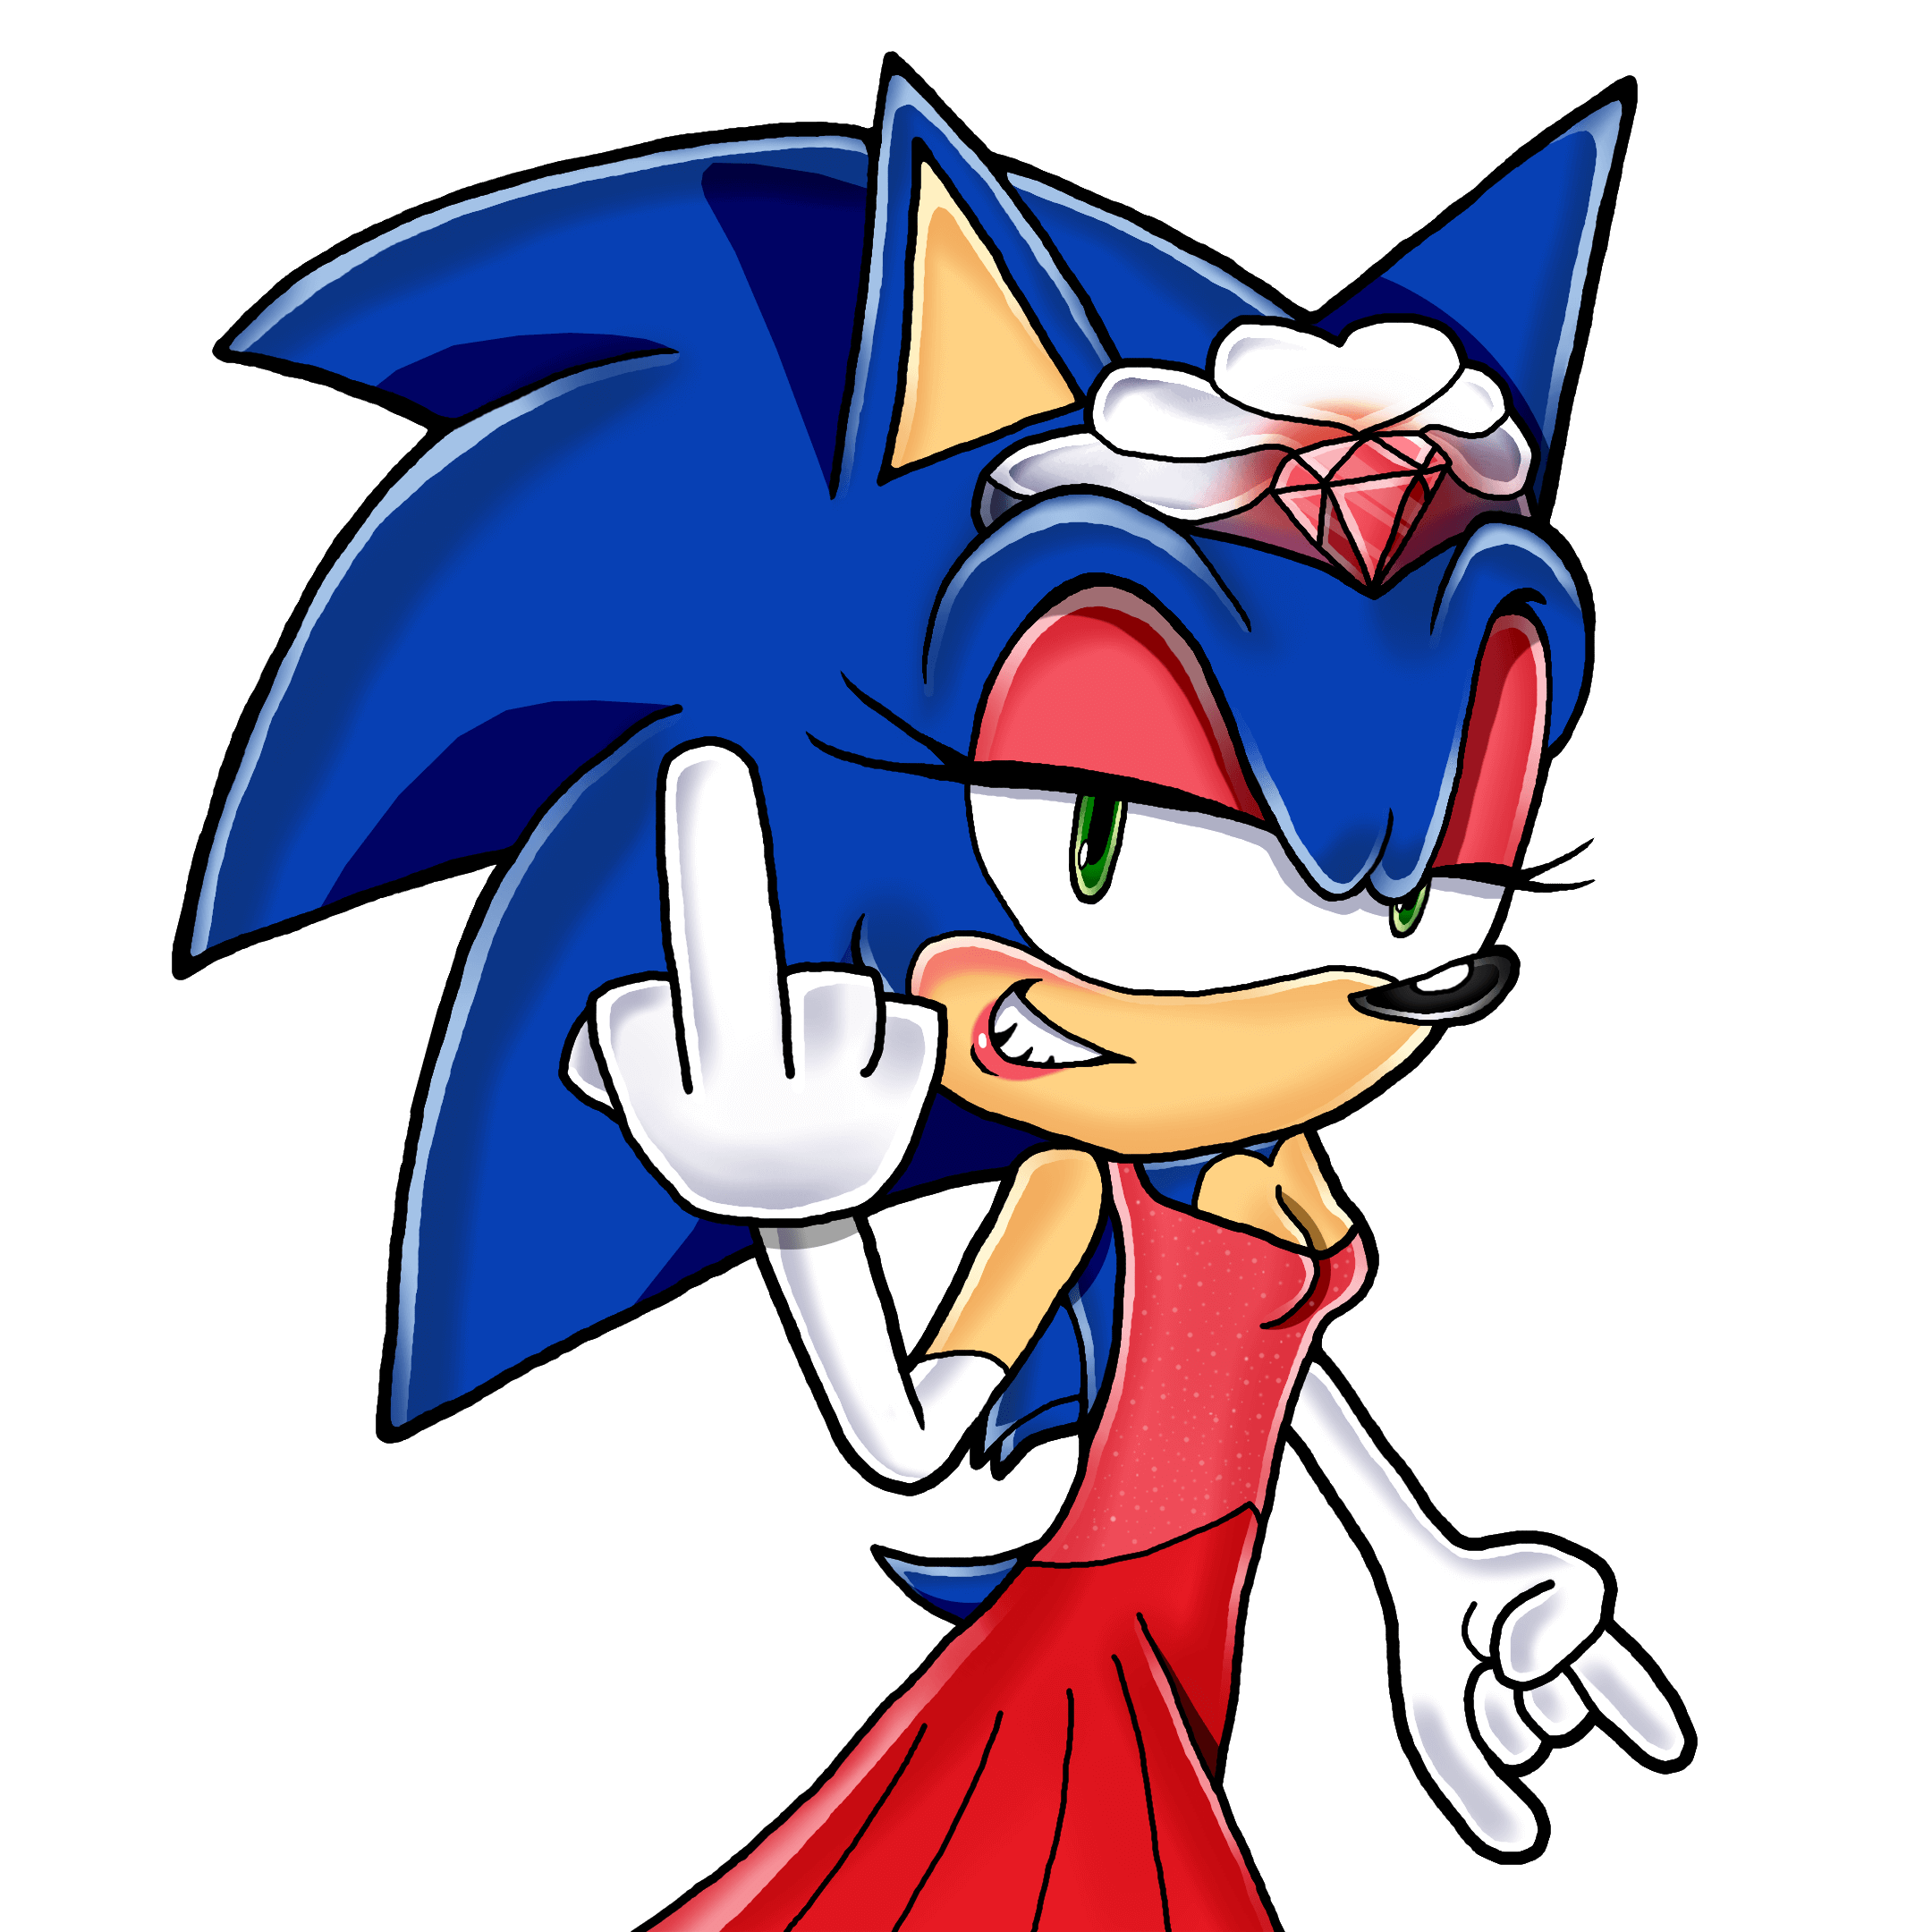 A drawing of Princess Sonic making devil horns and flipping the bird. Click through to its dedicated webpage for a more detailed description.